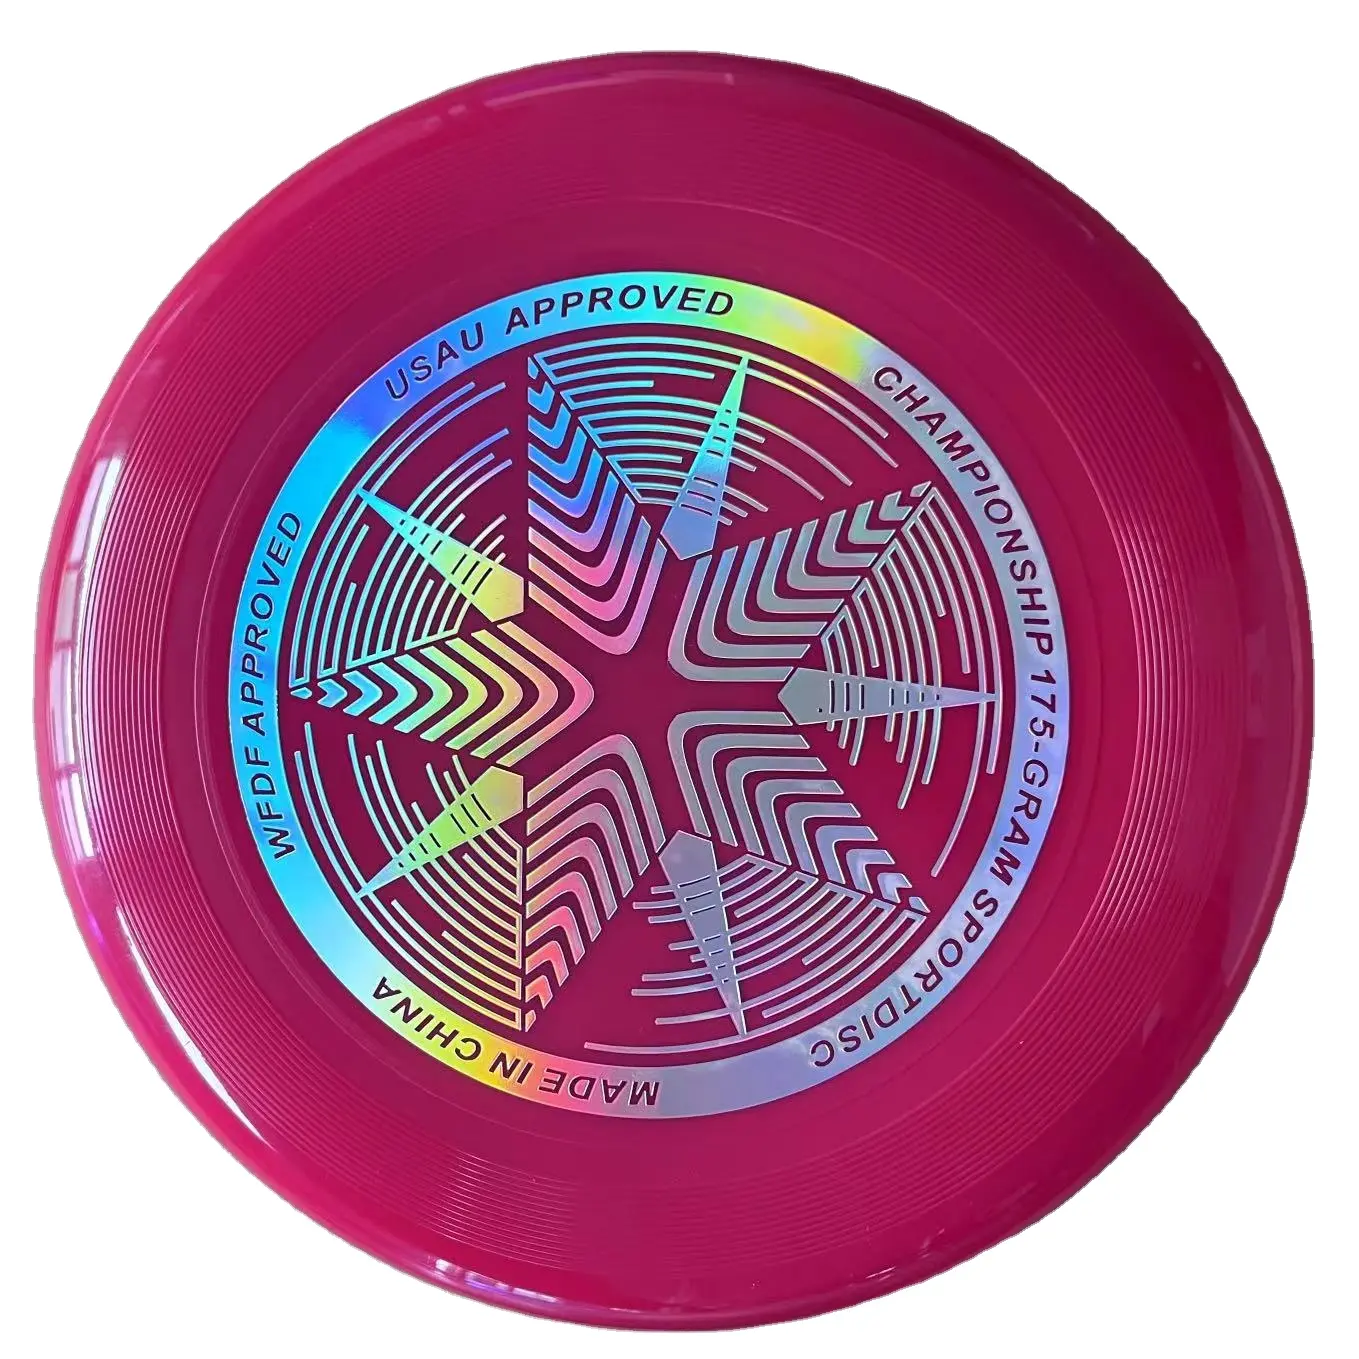 X-UFO Ultimate Frisbee factory Hot Selling Training Flying Disc Soft Plastic Championship Team Outdoor customize 175g Frisbee